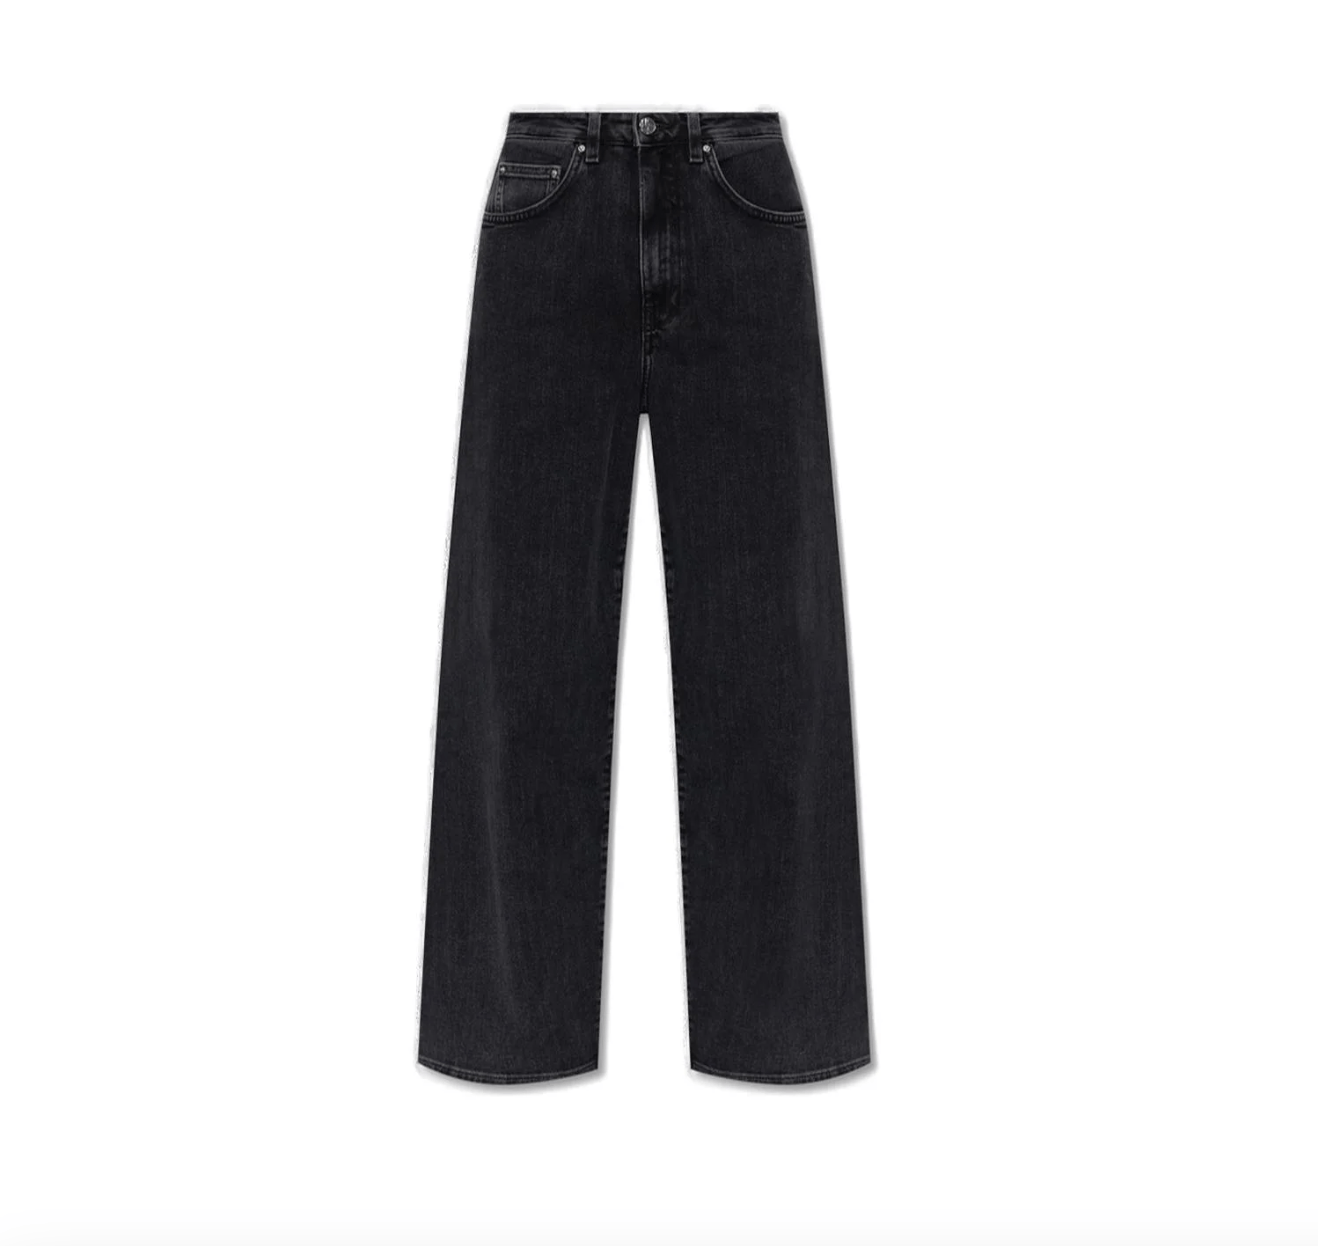 Toteme TOTEME Flair high-rise wide-leg jeans | Grailed